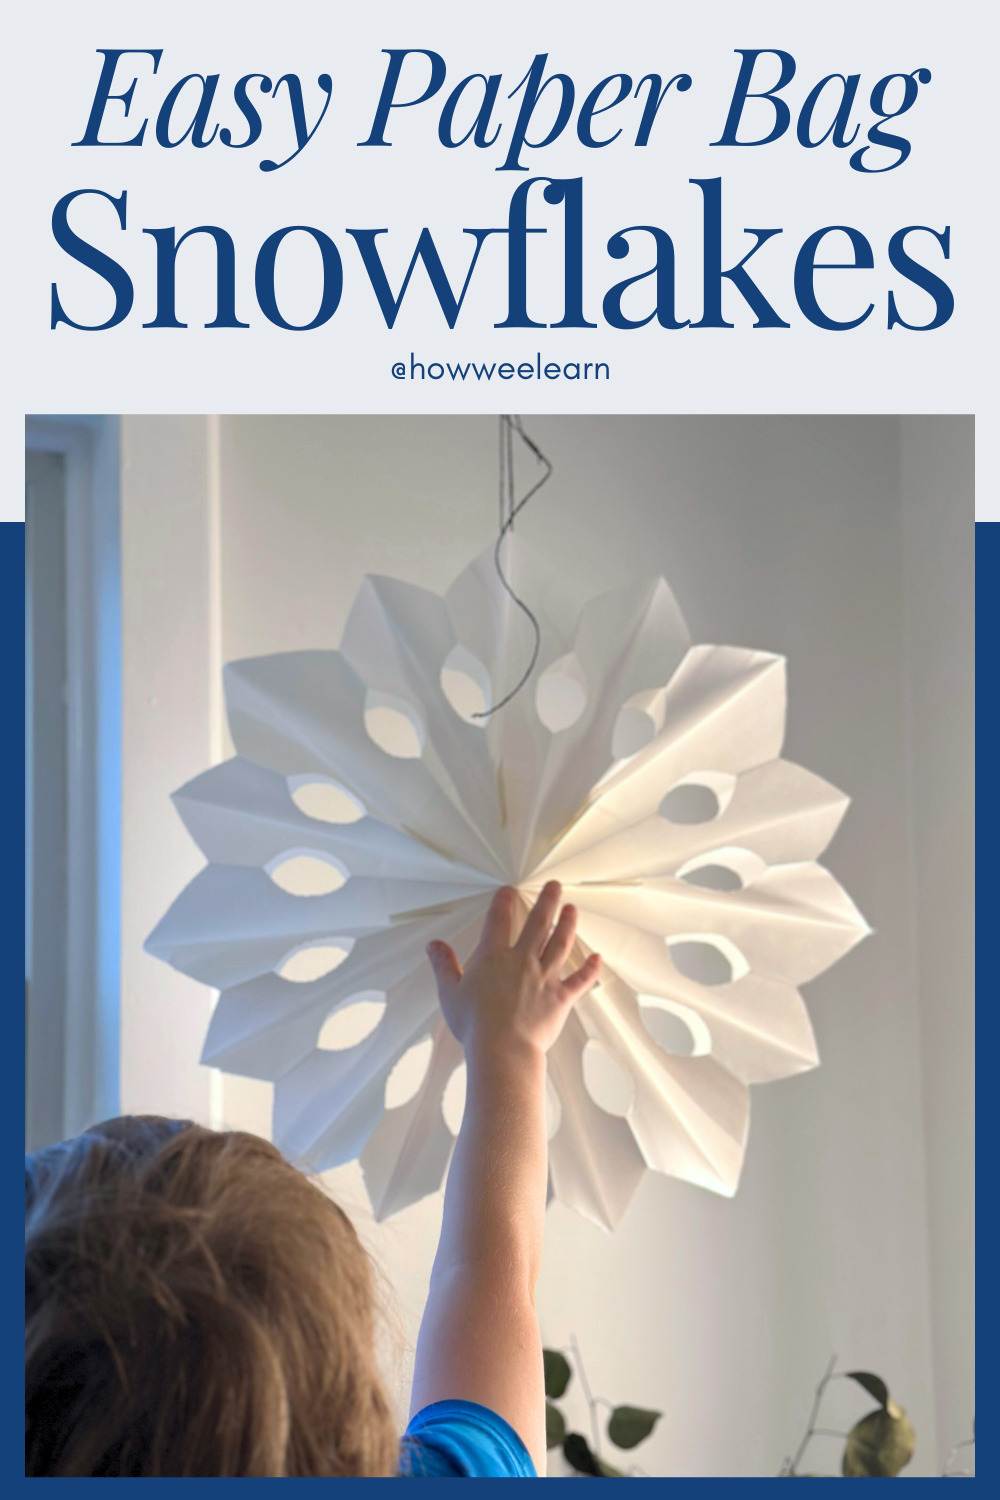 Easy Paper Bag Snowflakes: How to Make Paper Bag Snowflakes